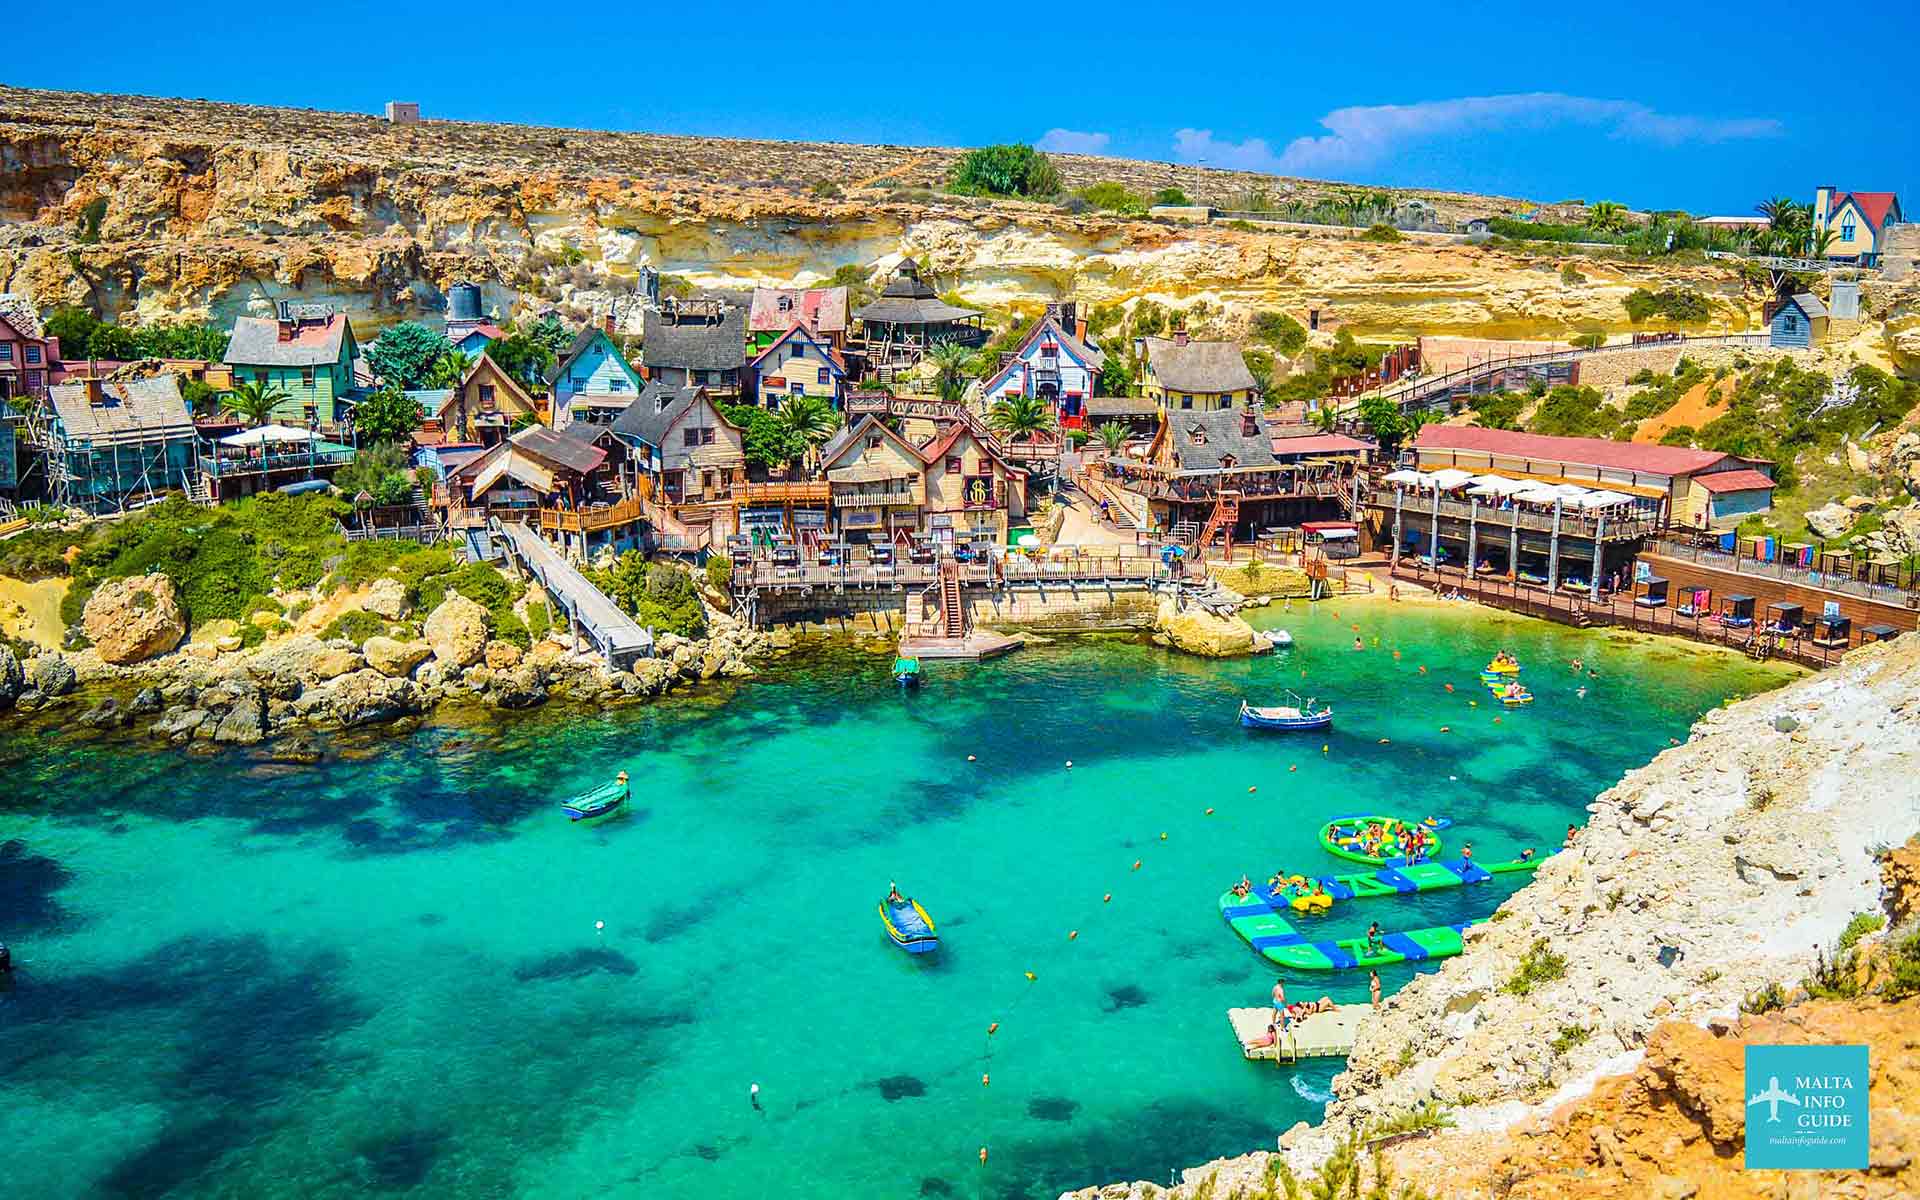 A view of Popeye Village Malta from a popular viewing spot.